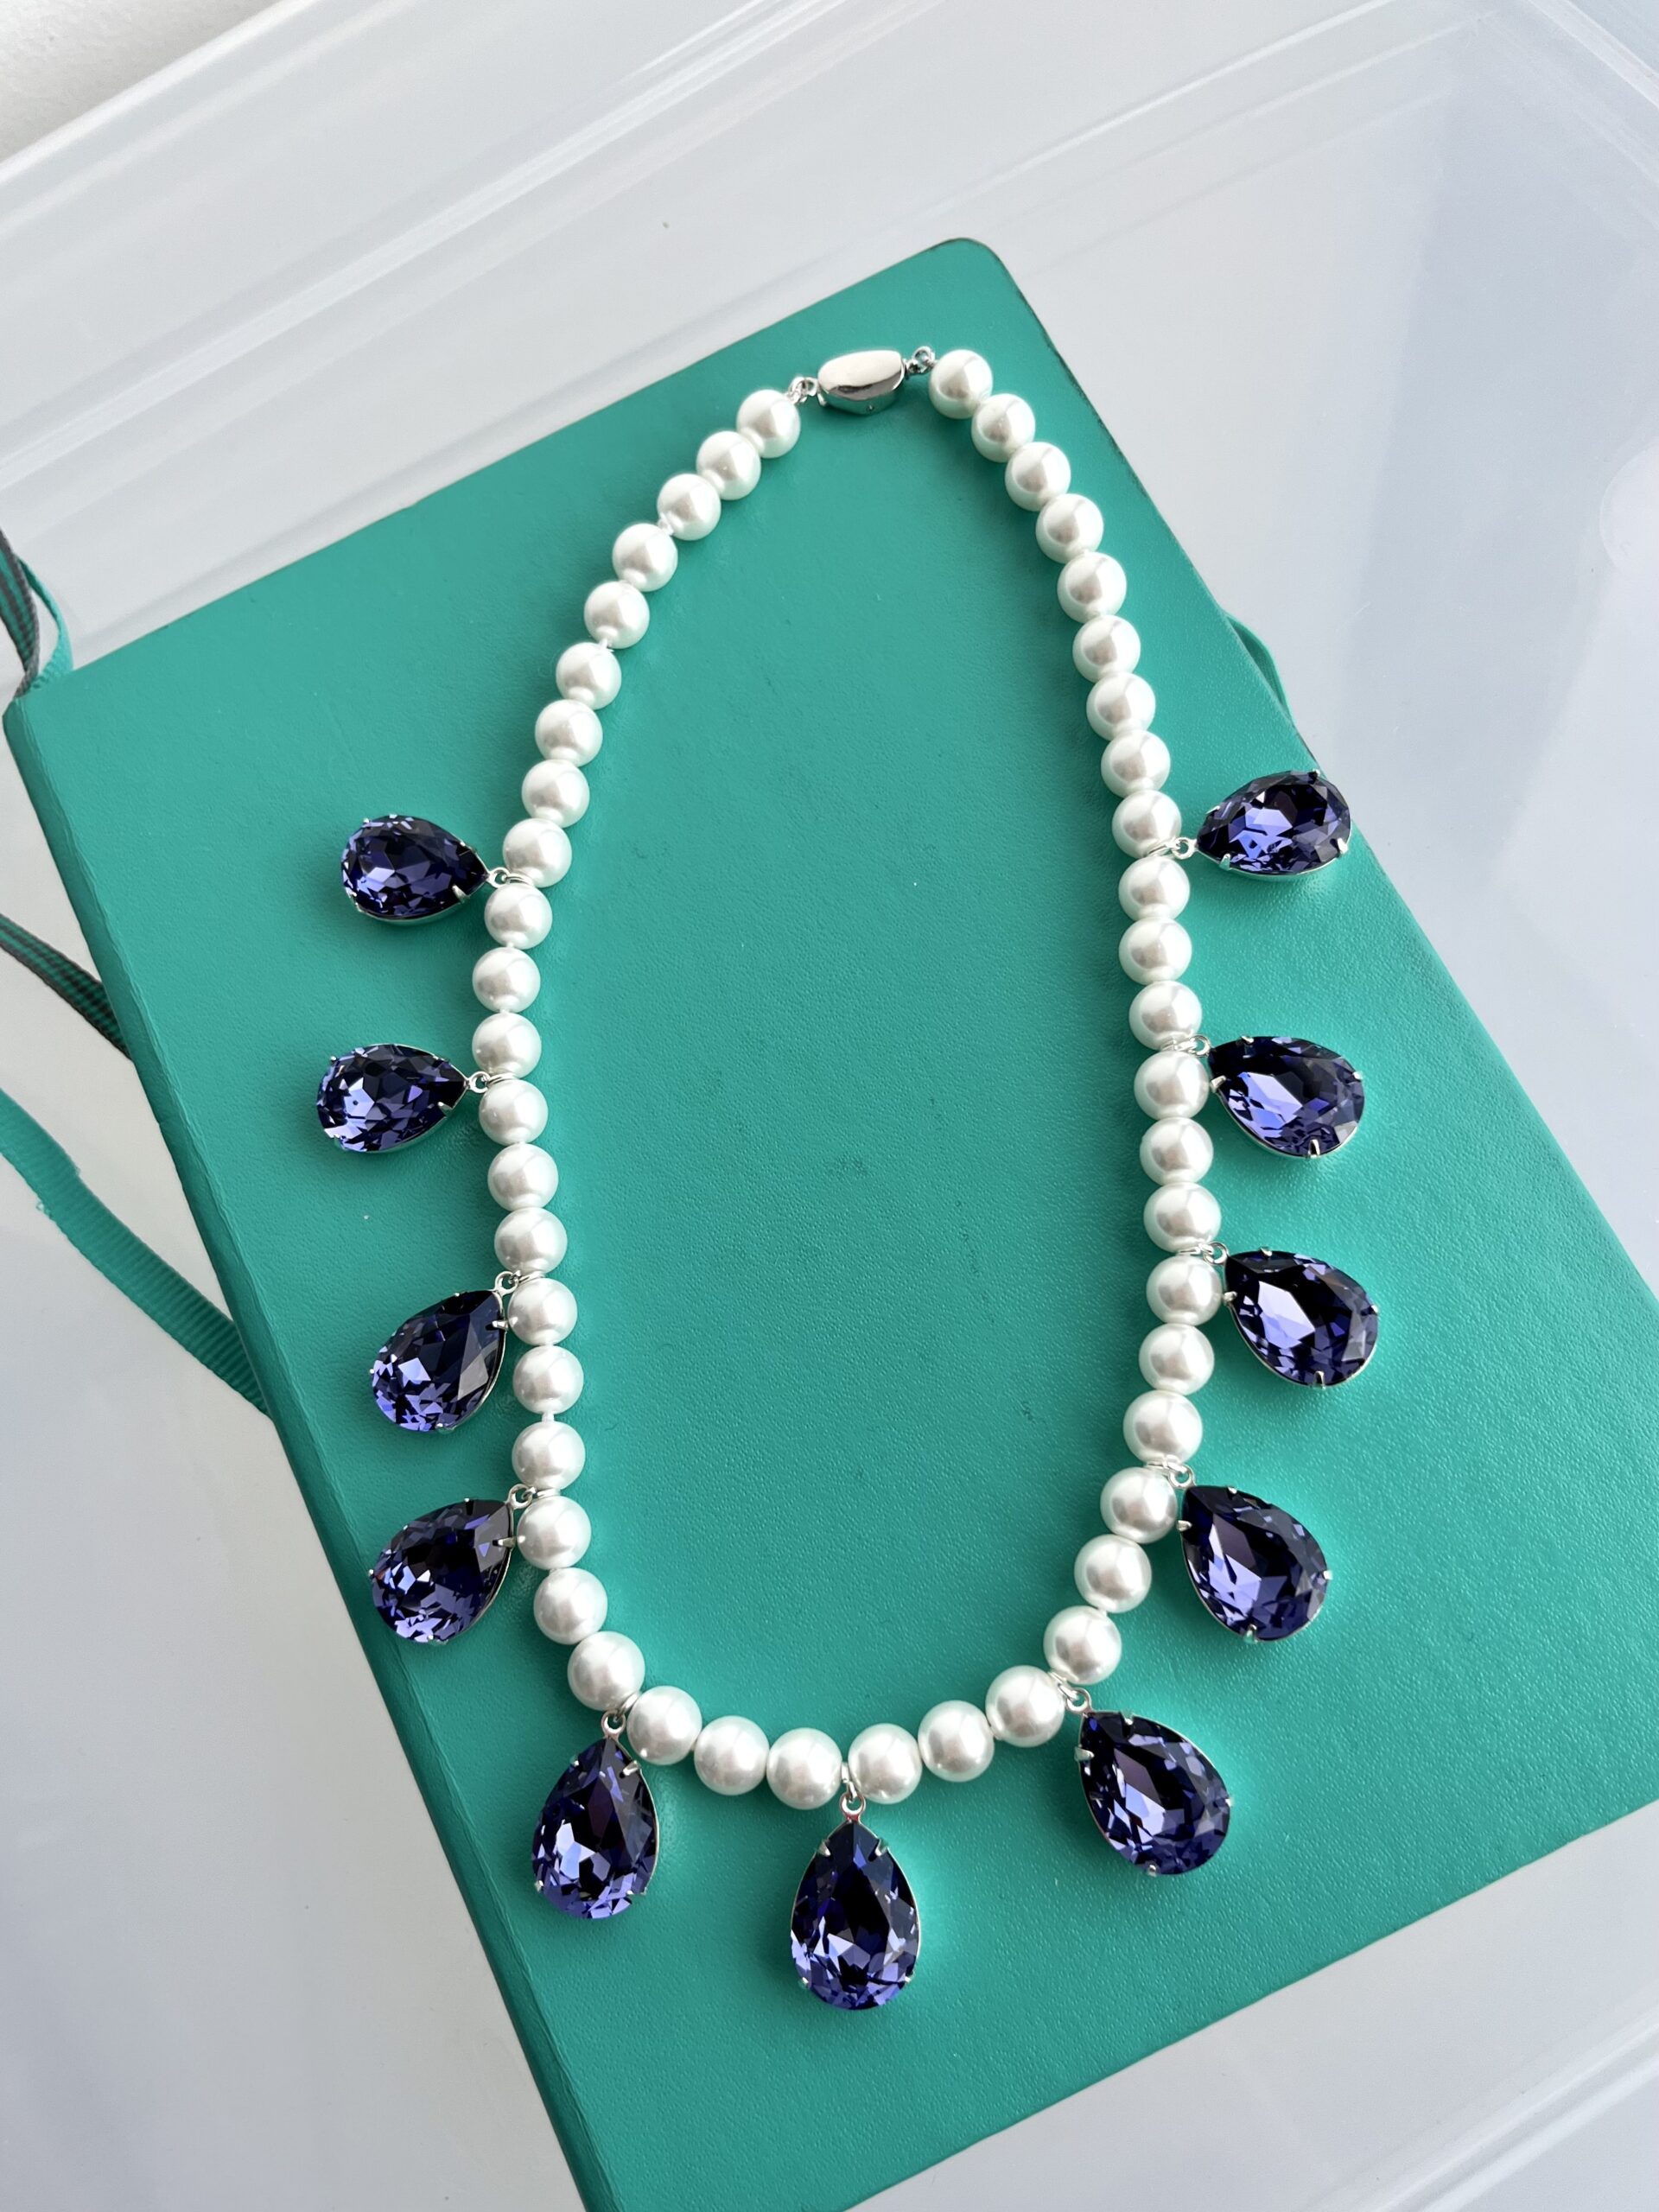 Stash-busting bling: A Napoleonic Pearl Necklace for New Year